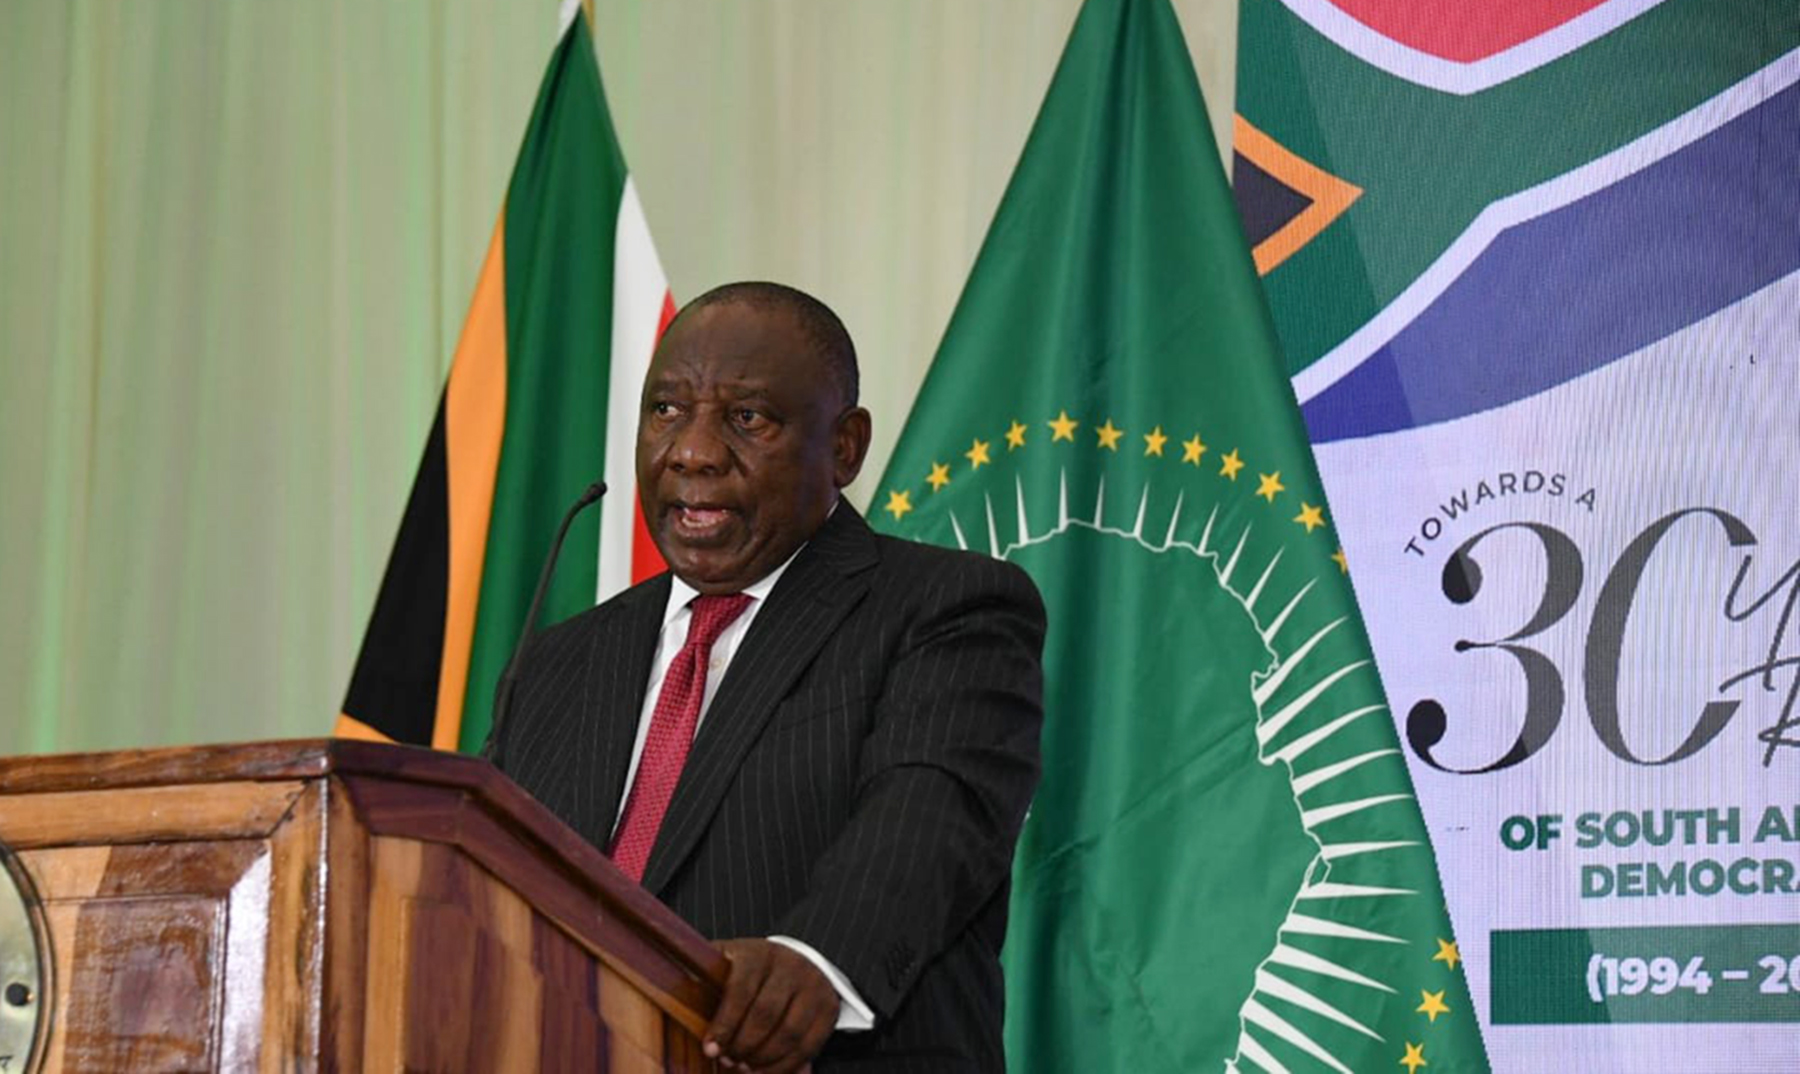 Cyril Ramaphosa, 30-Year Review Report